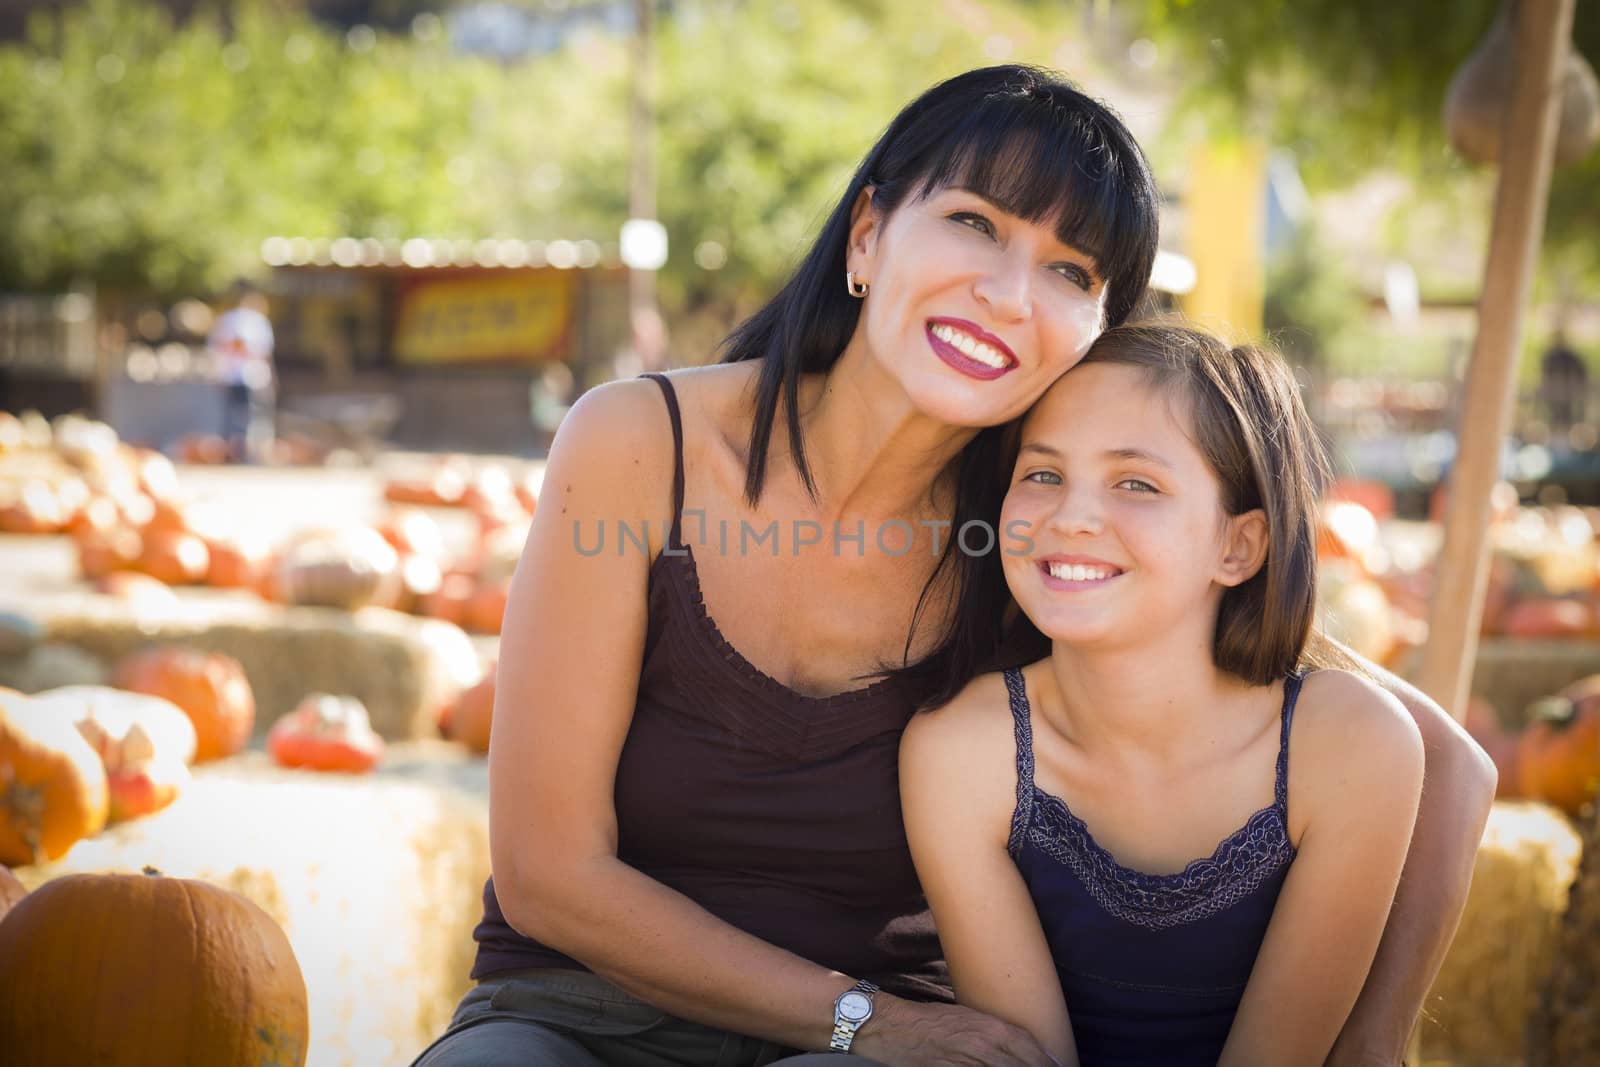 Attractive Mother and Daughter Portrait at the Pumpkin Patch
 by Feverpitched